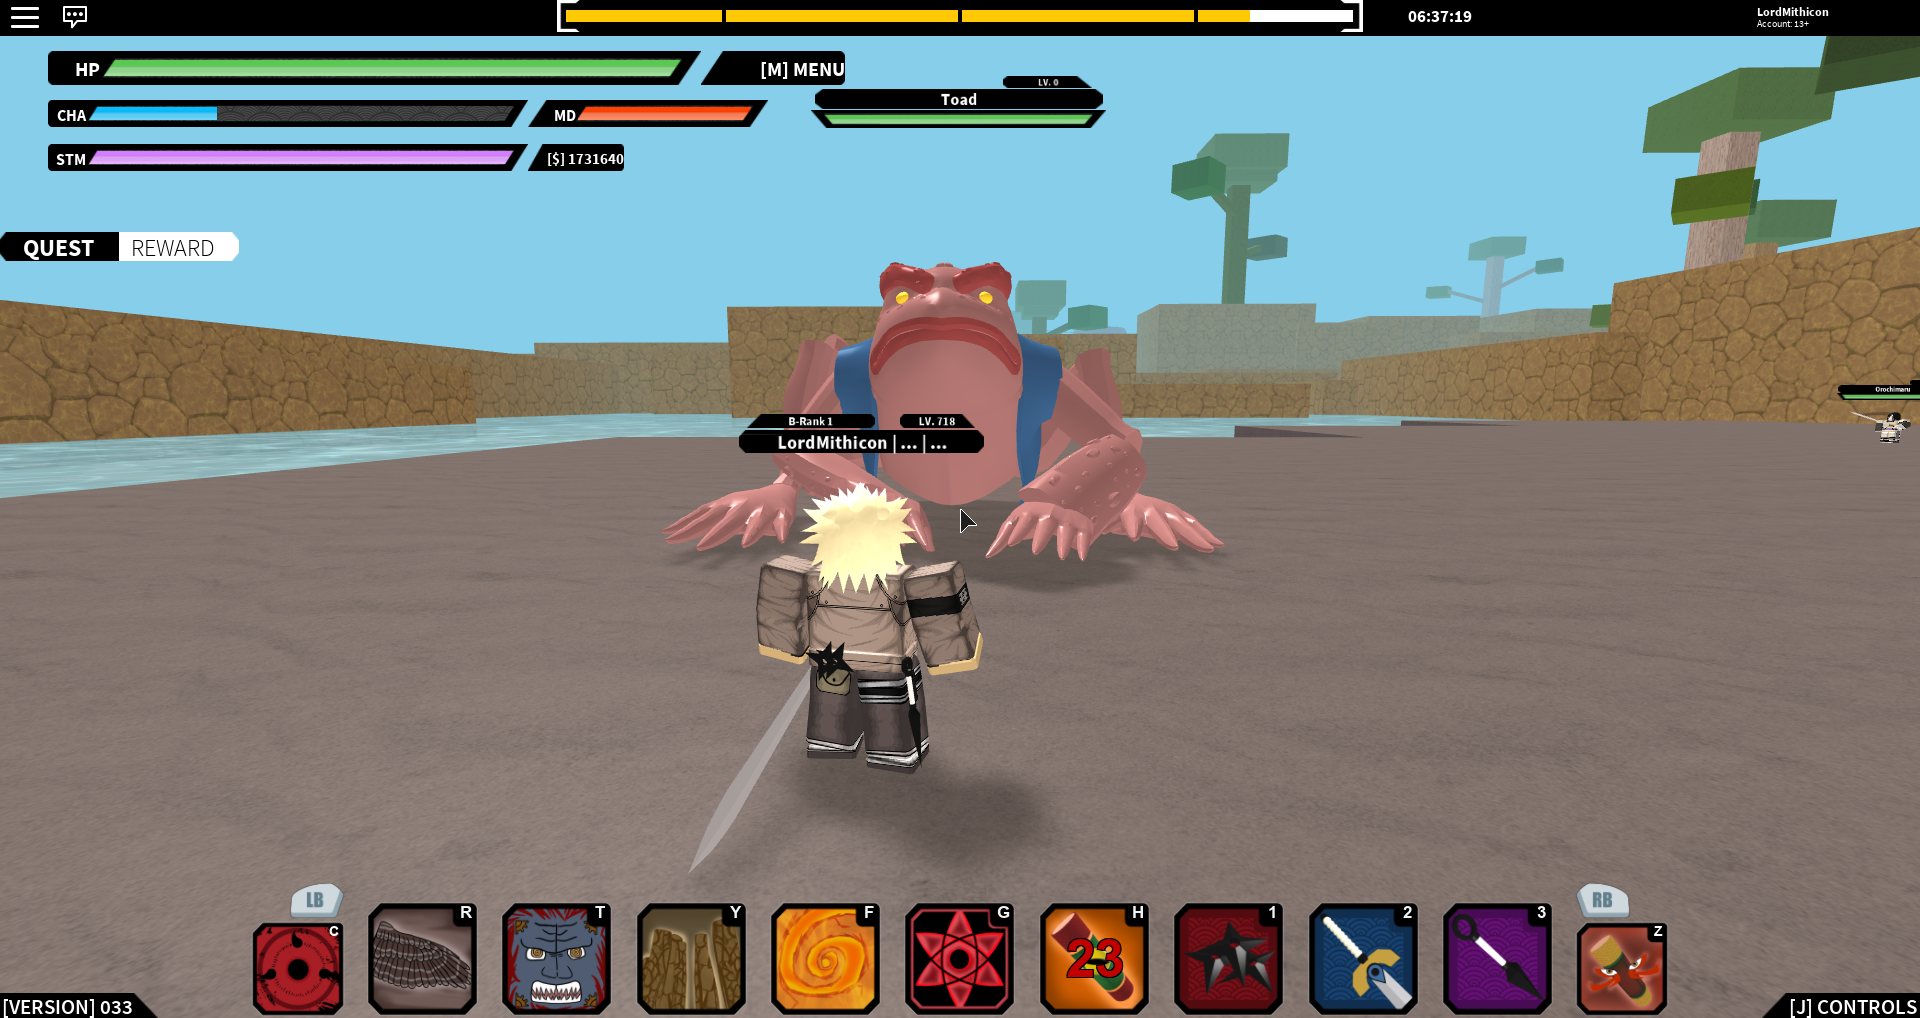 Roblox Naruto Rpg Beyond Sand Combat Good 2019 Story Games Roblox Free Play Online